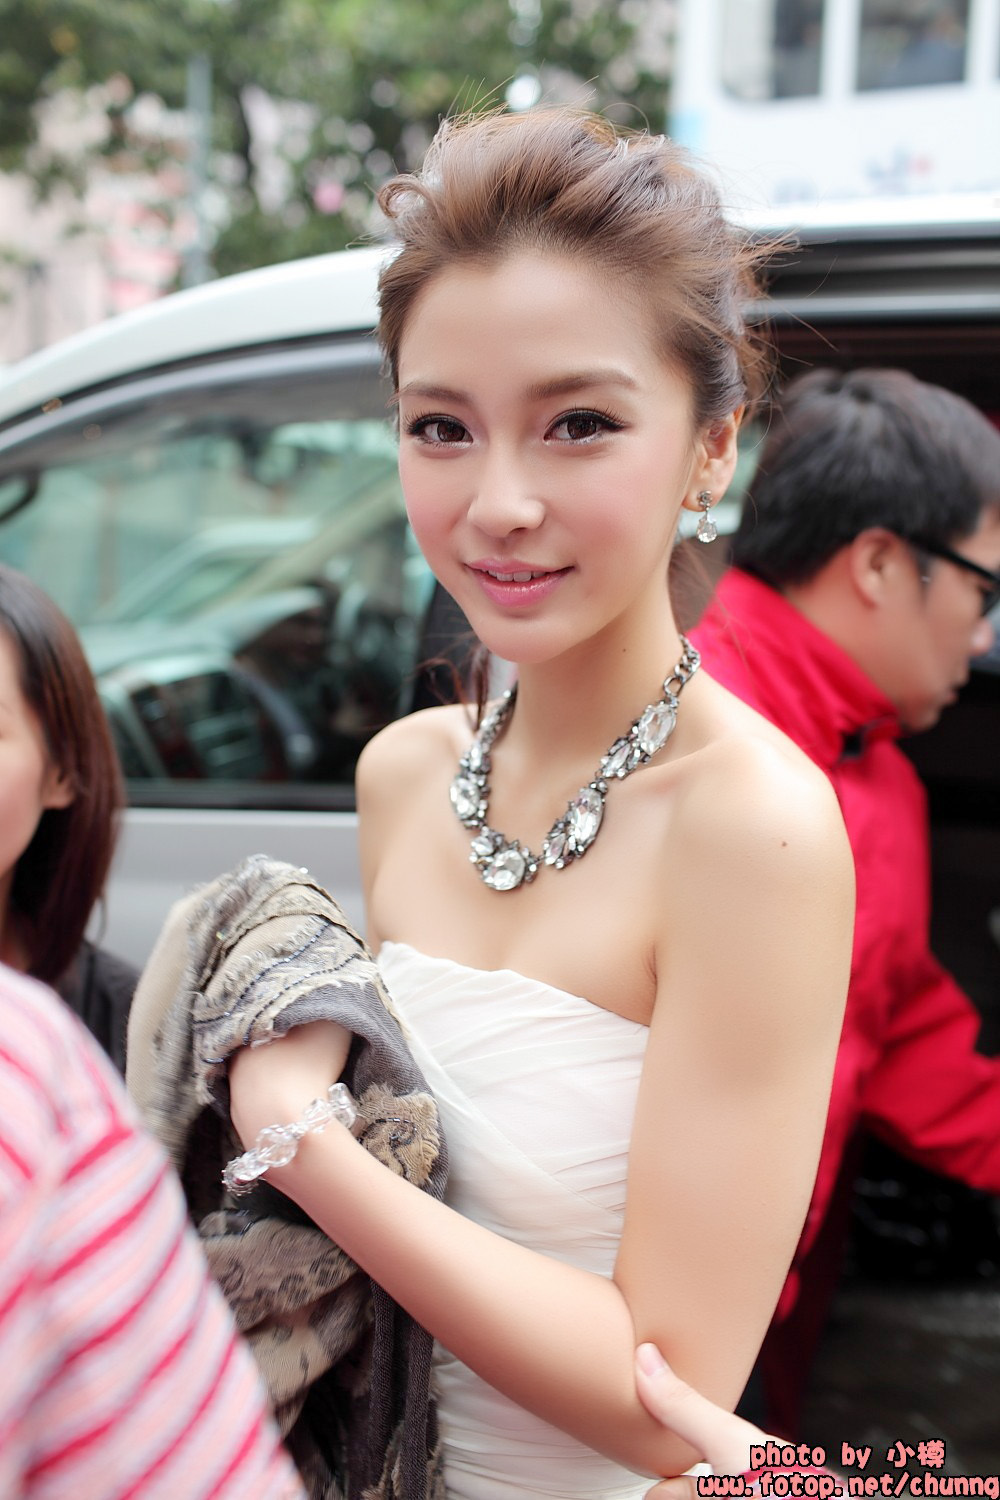 Angelababy Chinese Super Model, she is so cute